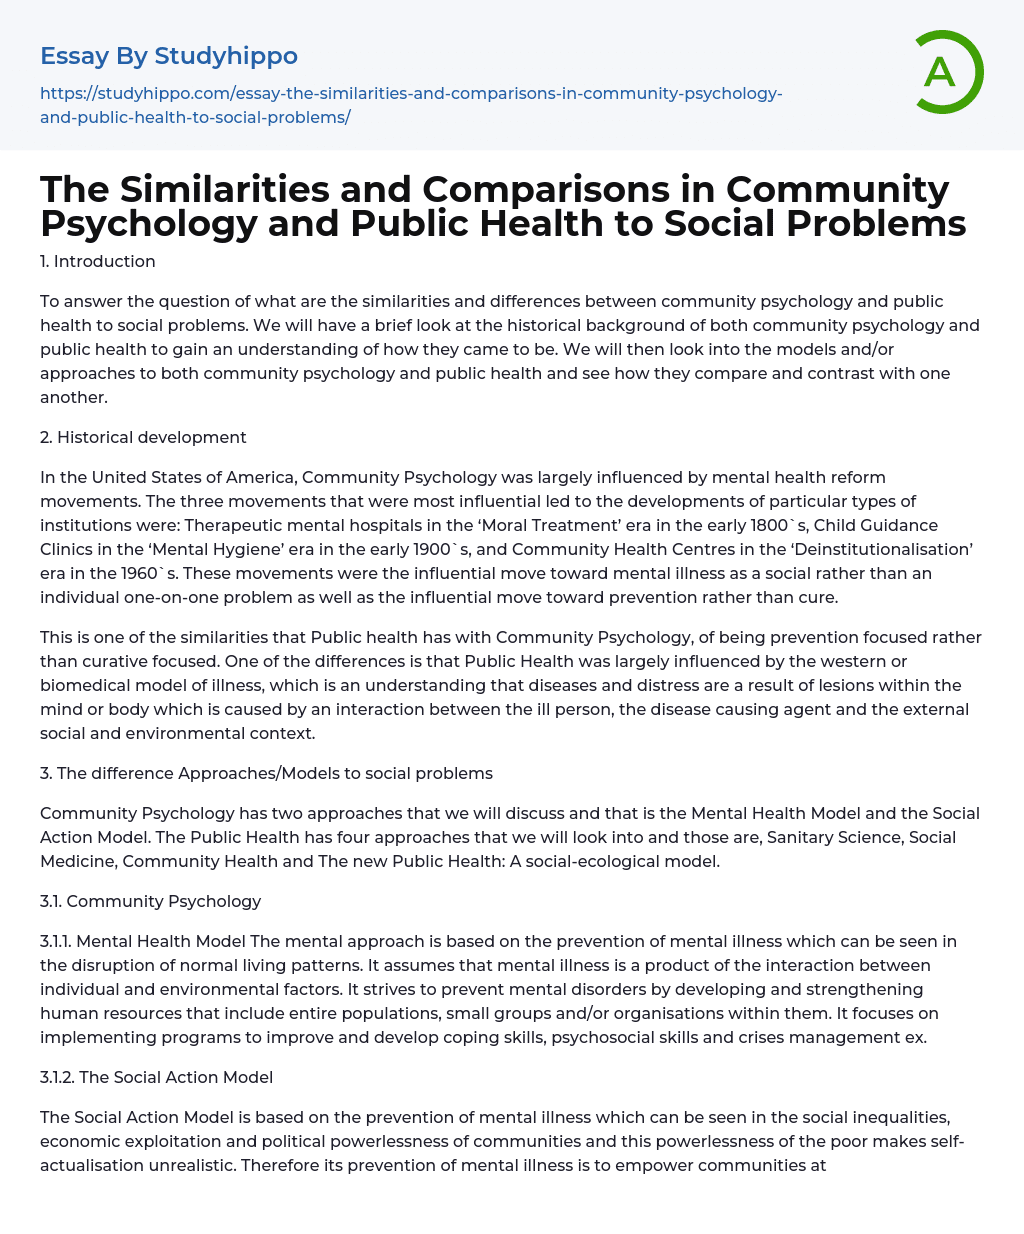 Comparing Community Psychology and Public Health Approaches to Social Problems